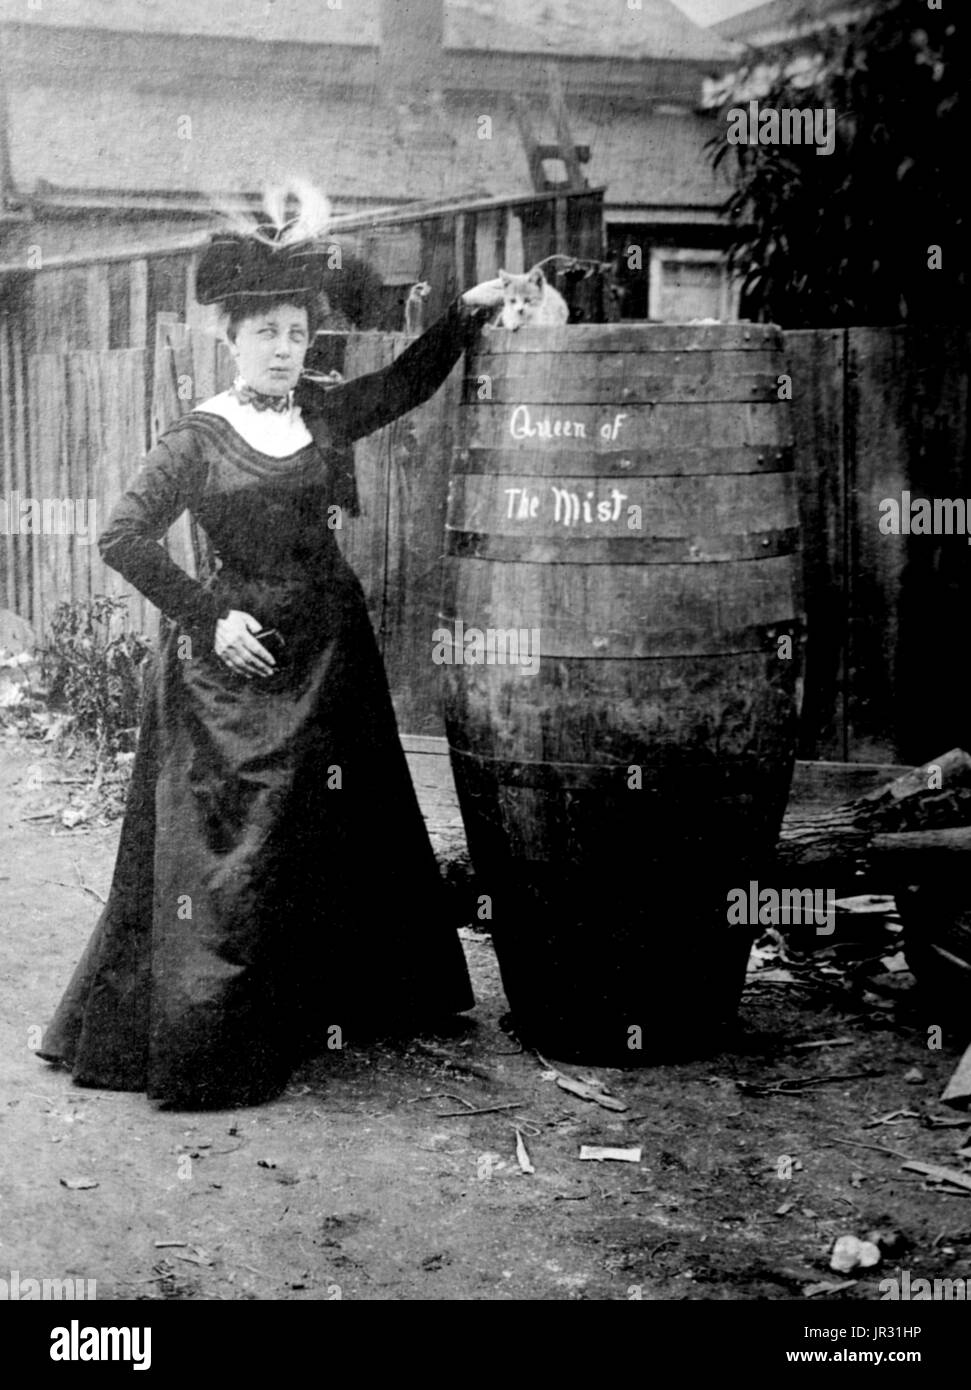 Annie Edson Taylor (October 24, 1838 - April 29, 1921) was an American teacher. Desiring to secure her later years financially, she decided she would be the first person to ride over Niagara Falls in a barrel. Taylor used a custom-made barrel for her trip, constructed of oak and iron and padded with a mattress. On October 24, 1901, her 63rd birthday, the barrel was put over the side of a rowboat, and Taylor climbed in, along with her lucky heart-shaped pillow. After screwing down the lid, friends used a bicycle tire pump to compress the air in the barrel. The hole used for this was plugged wit Stock Photo